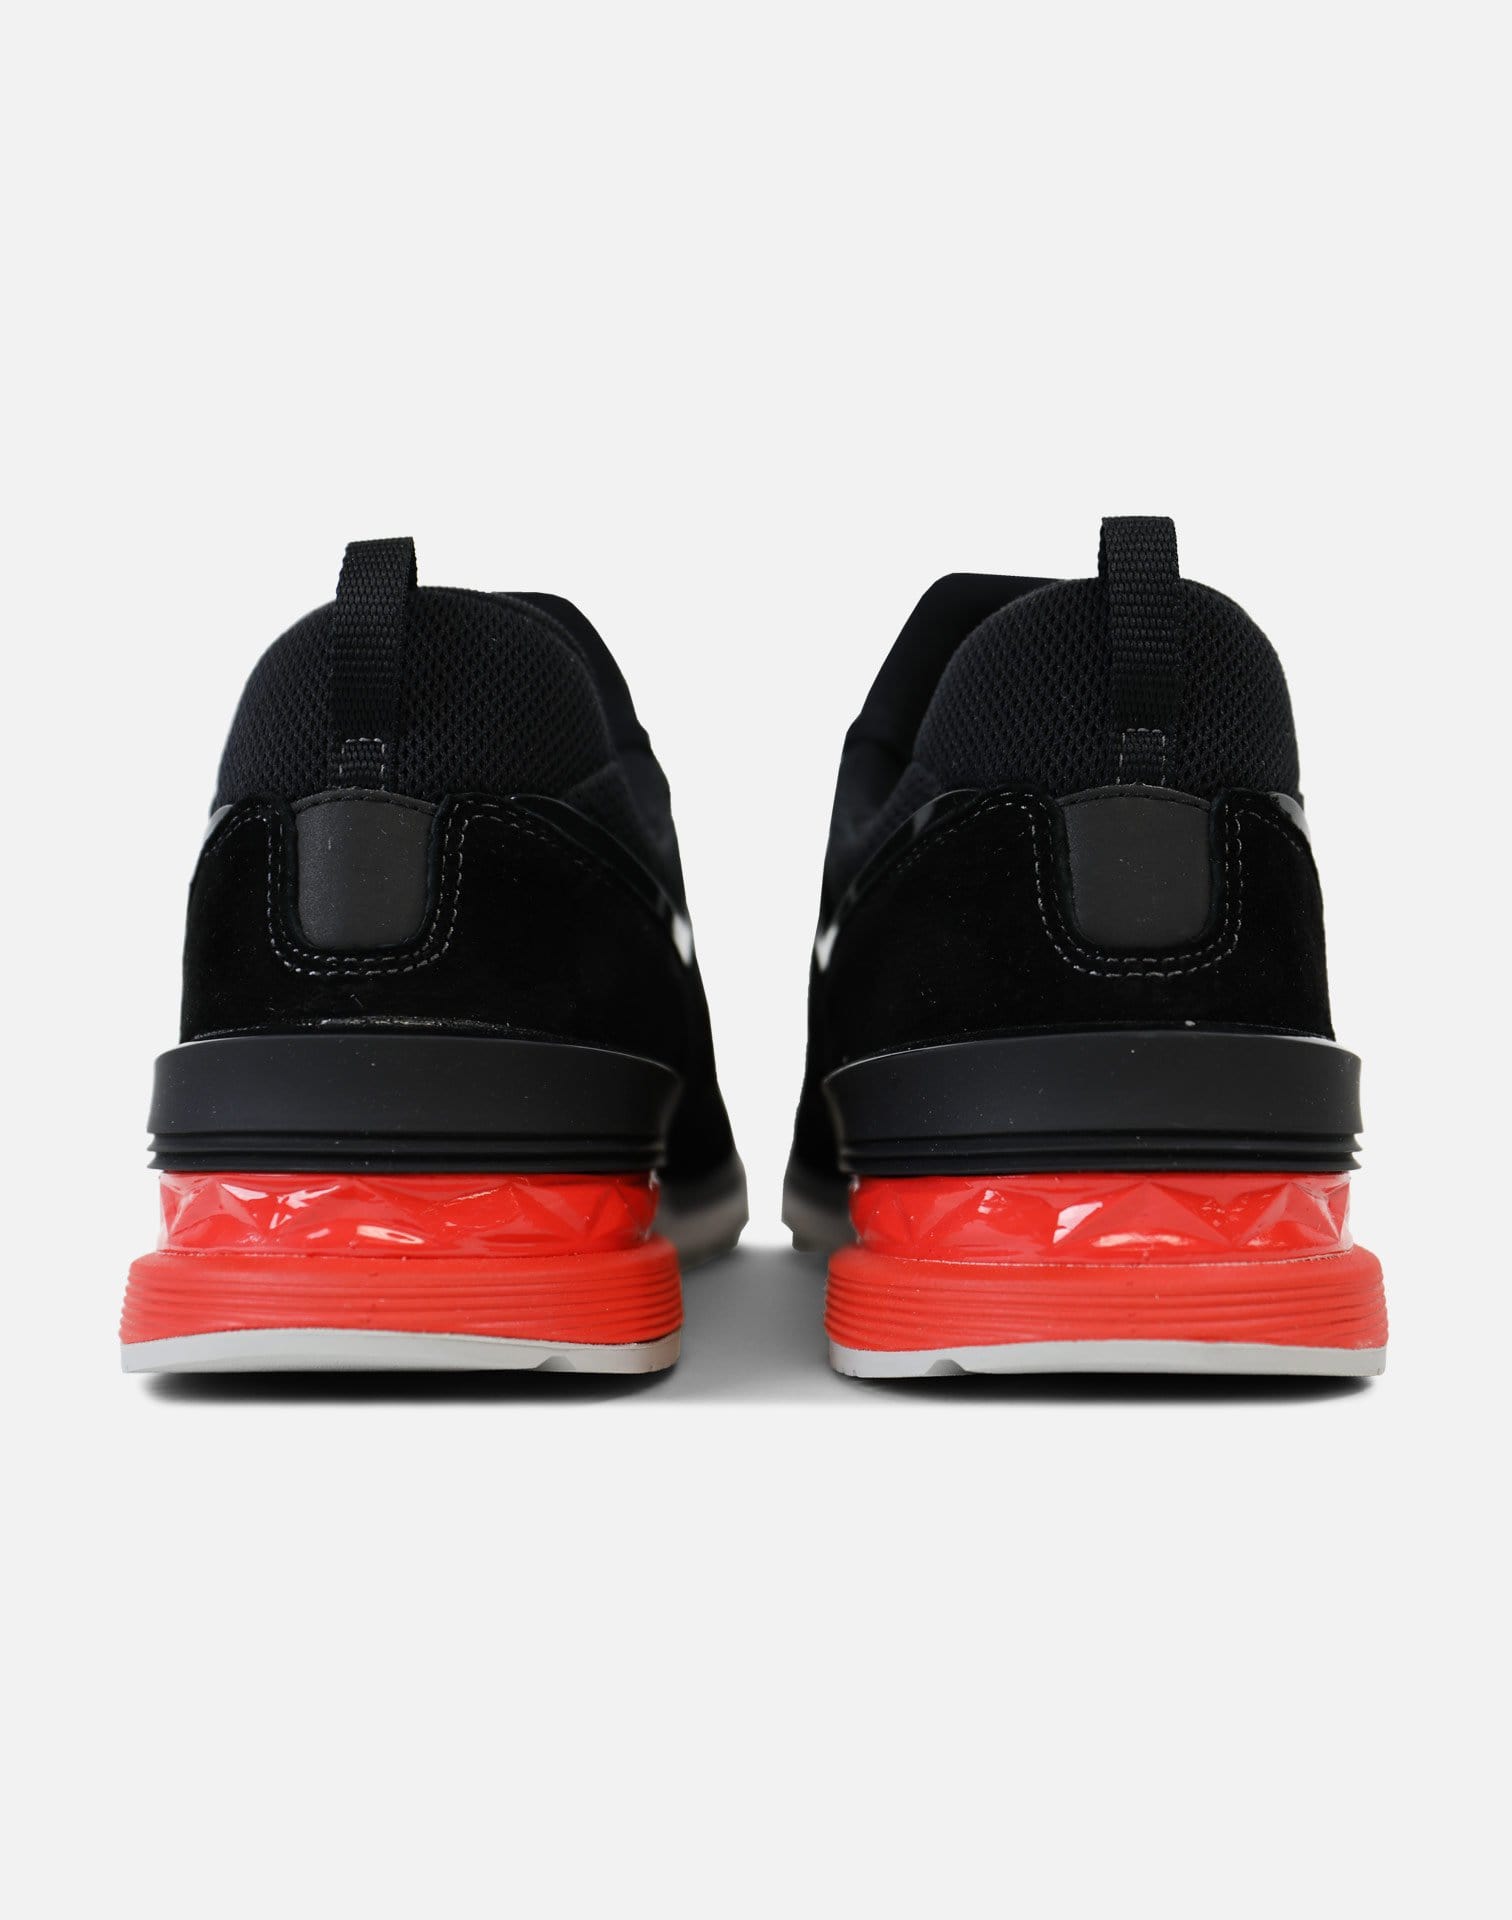 RUVilla.com is where to buy the New Balance 574 Lux (Black/Red-White)!